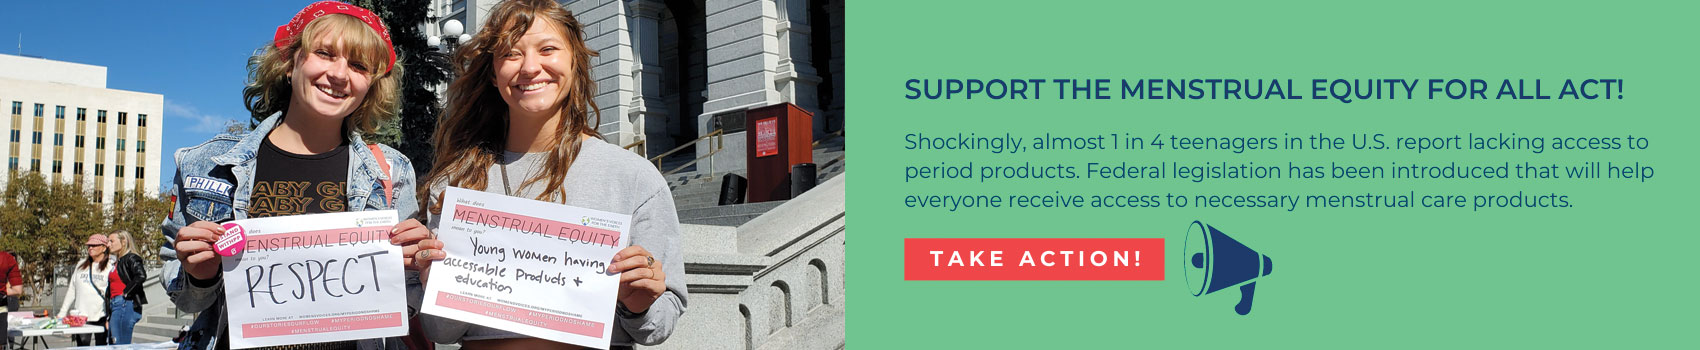 support access to safe, affordable period products